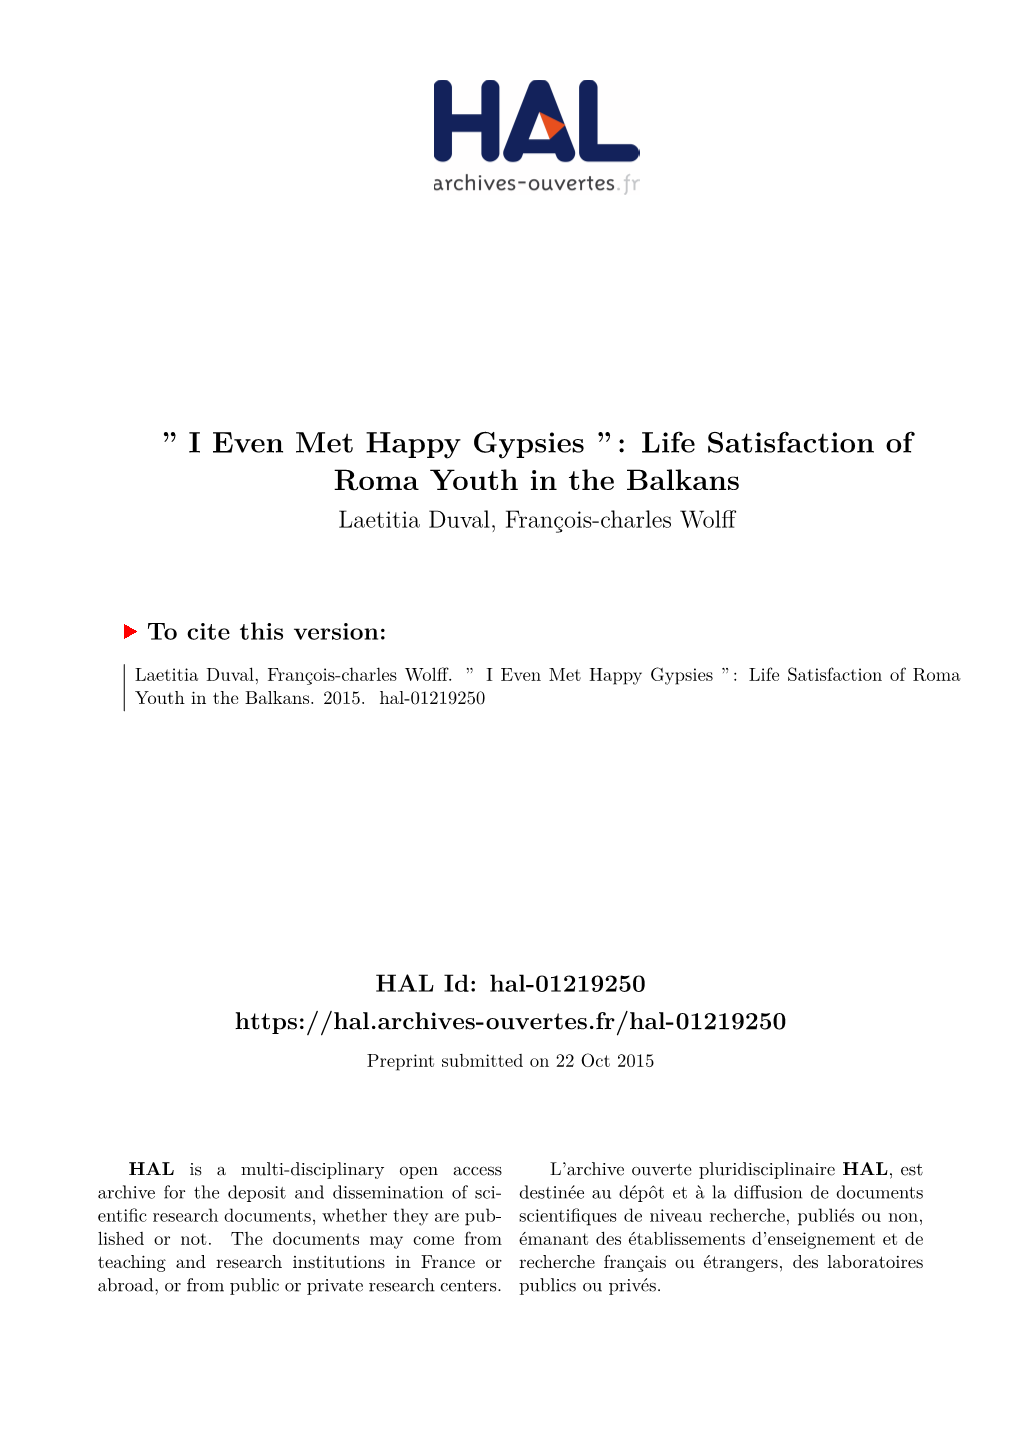 Life Satisfaction of Roma Youth in the Balkans Laetitia Duval, François-Charles Wolff